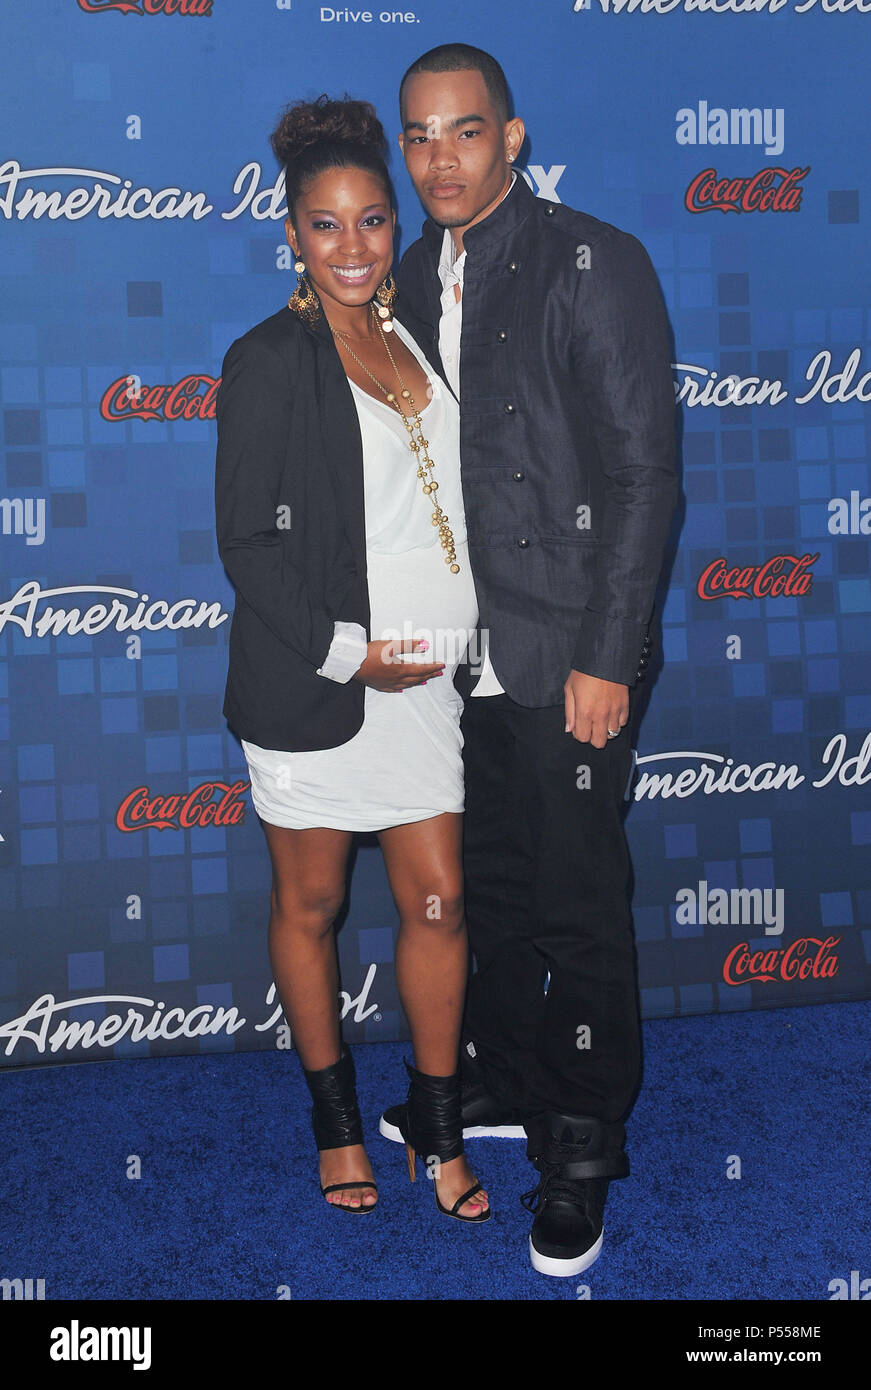 Reagan Gomez-Preston, DeWayne Turrentine  at American Idol Finalists Party ( Last 13 ) at the Grove in Los Angeles.Reagan Gomez-Preston, DeWayne Turrentine  87 ------------- Red Carpet Event, Vertical, USA, Film Industry, Celebrities,  Photography, Bestof, Arts Culture and Entertainment, Topix Celebrities fashion /  Vertical, Best of, Event in Hollywood Life - California,  Red Carpet and backstage, USA, Film Industry, Celebrities,  movie celebrities, TV celebrities, Music celebrities, Photography, Bestof, Arts Culture and Entertainment,  Topix, vertical,  family from from the year , 2011, inqu Stock Photo